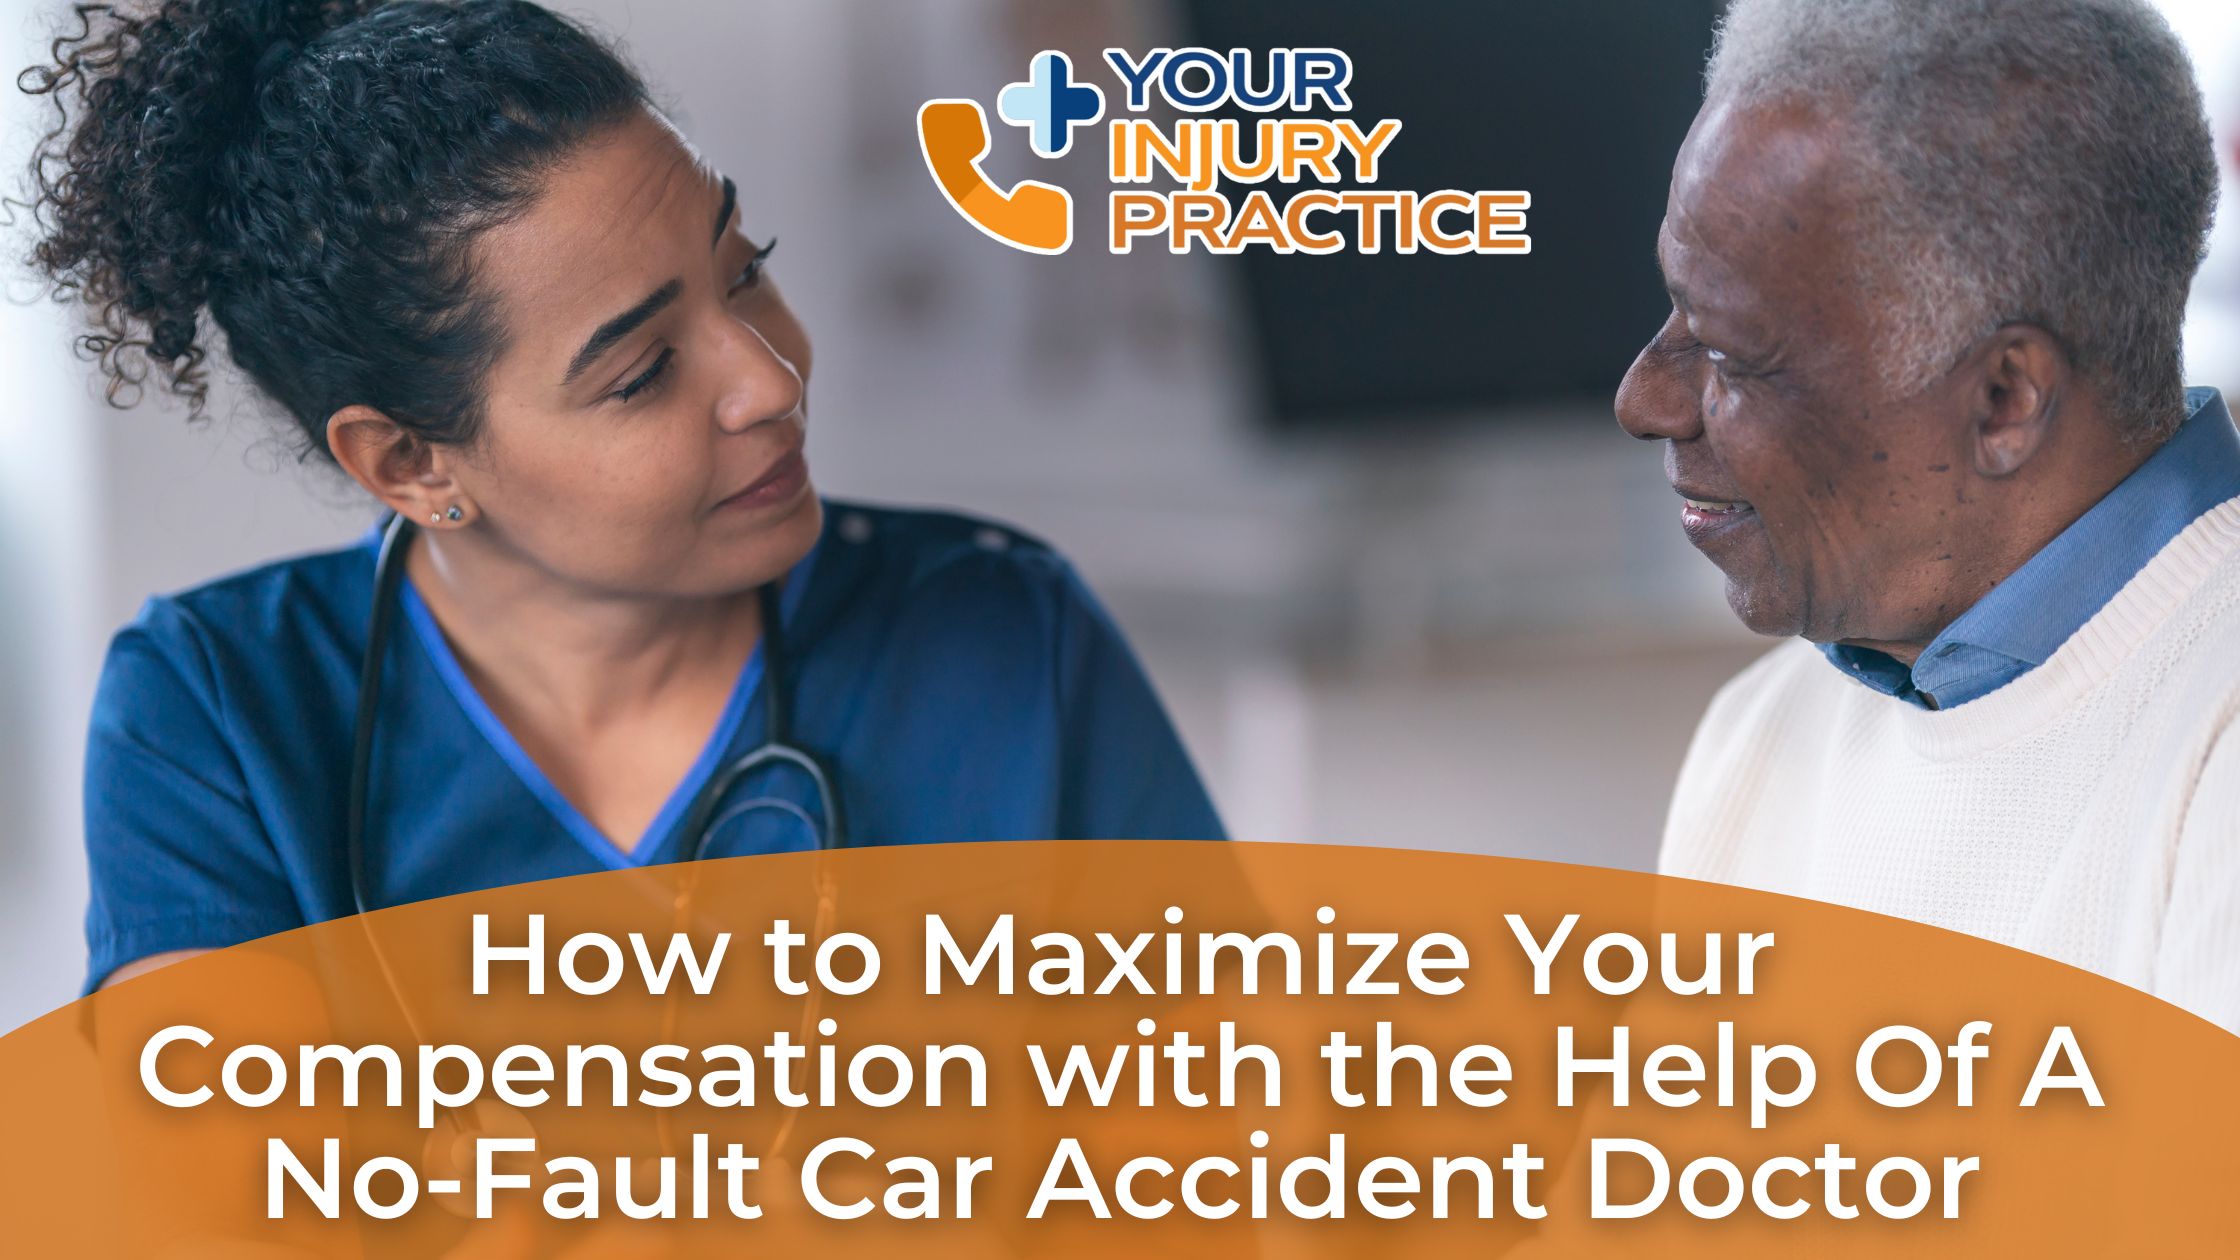 How to Maximize Your Compensation with the Help of a No-Fault Car Accident Doctor